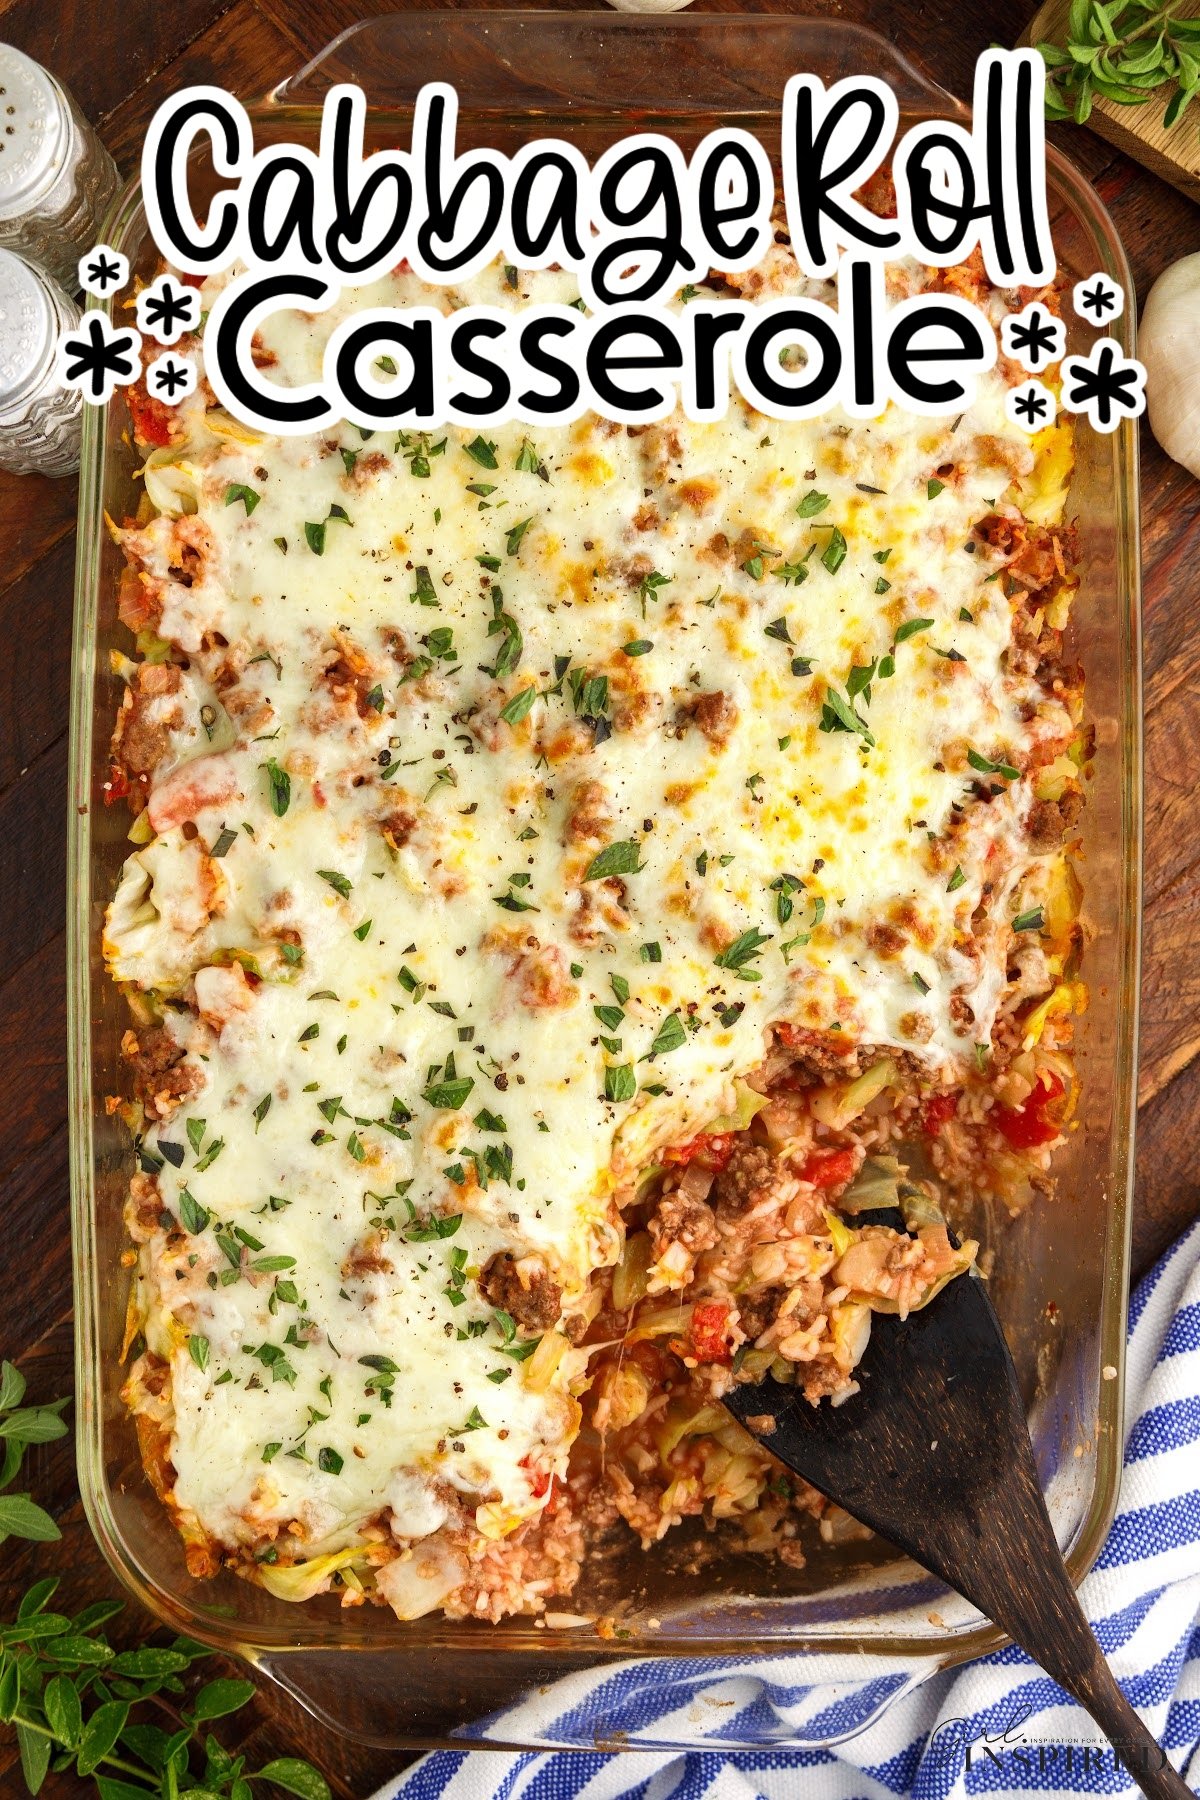 Overhead view of a 9x13 dish of Cabbage Roll Casserole with a serving missing with text overlay.